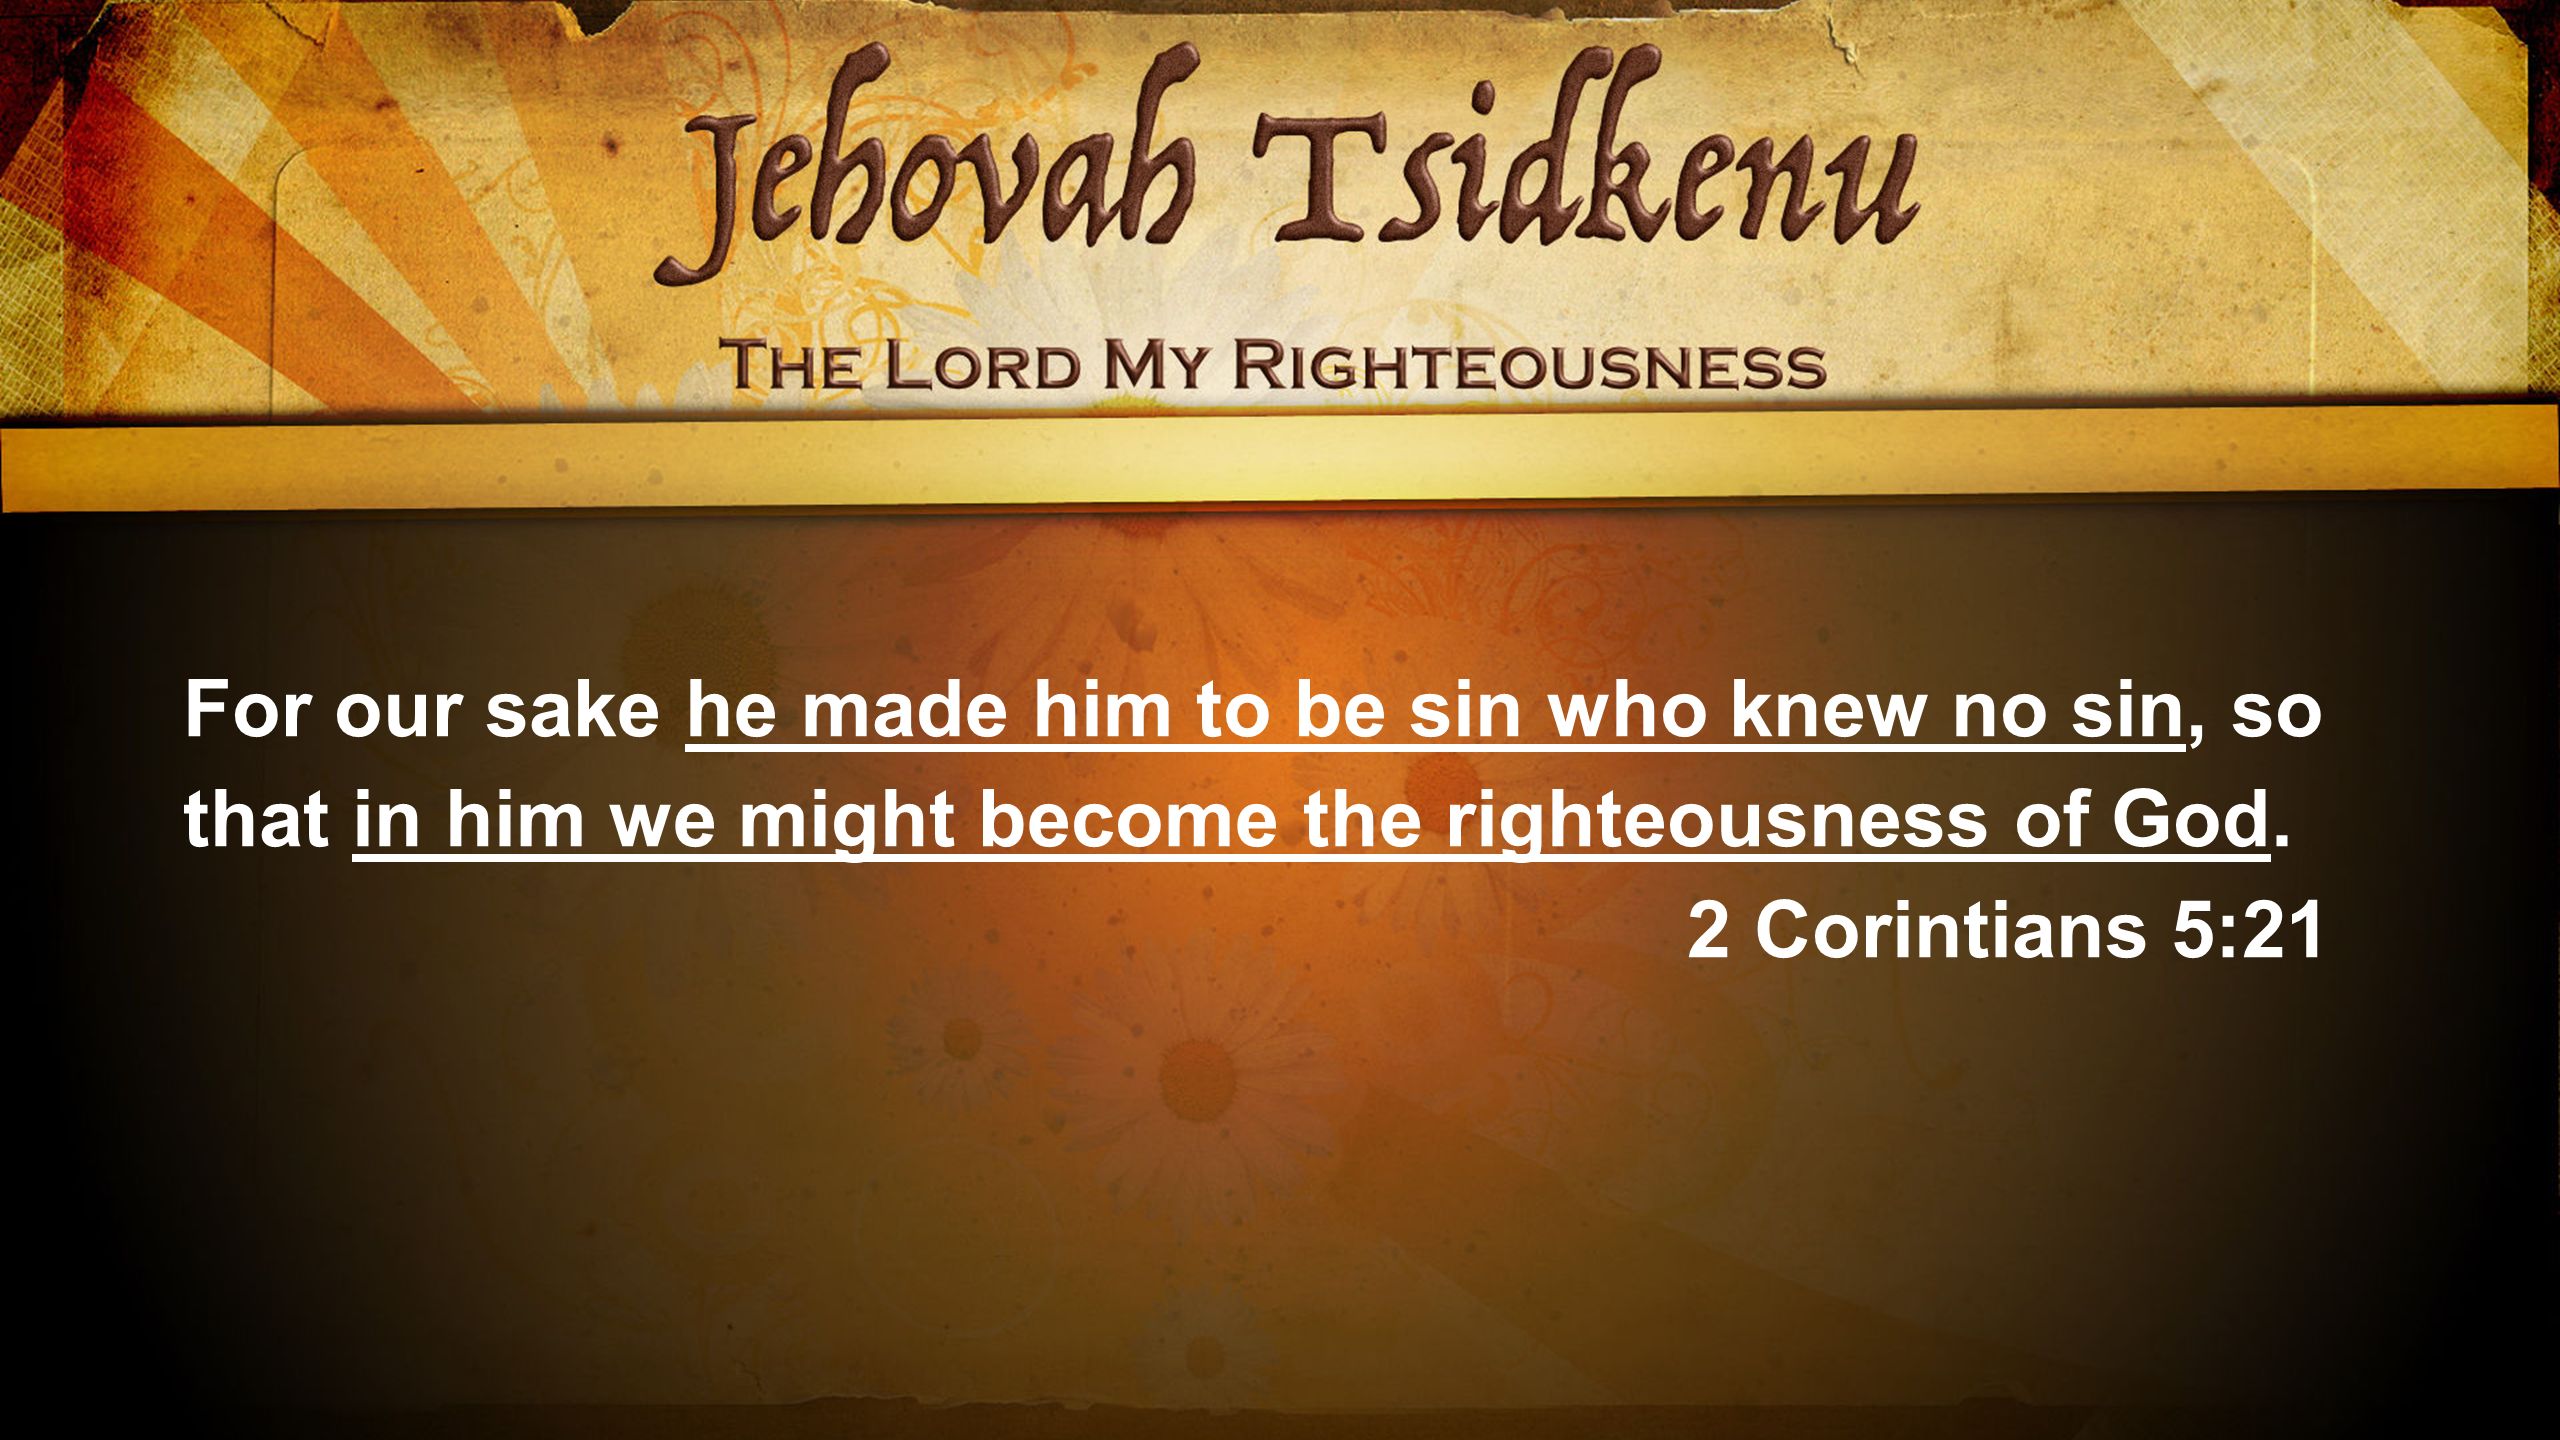 For our sake he made him to be sin who knew no sin, so that in him we might become the righteousness of God.